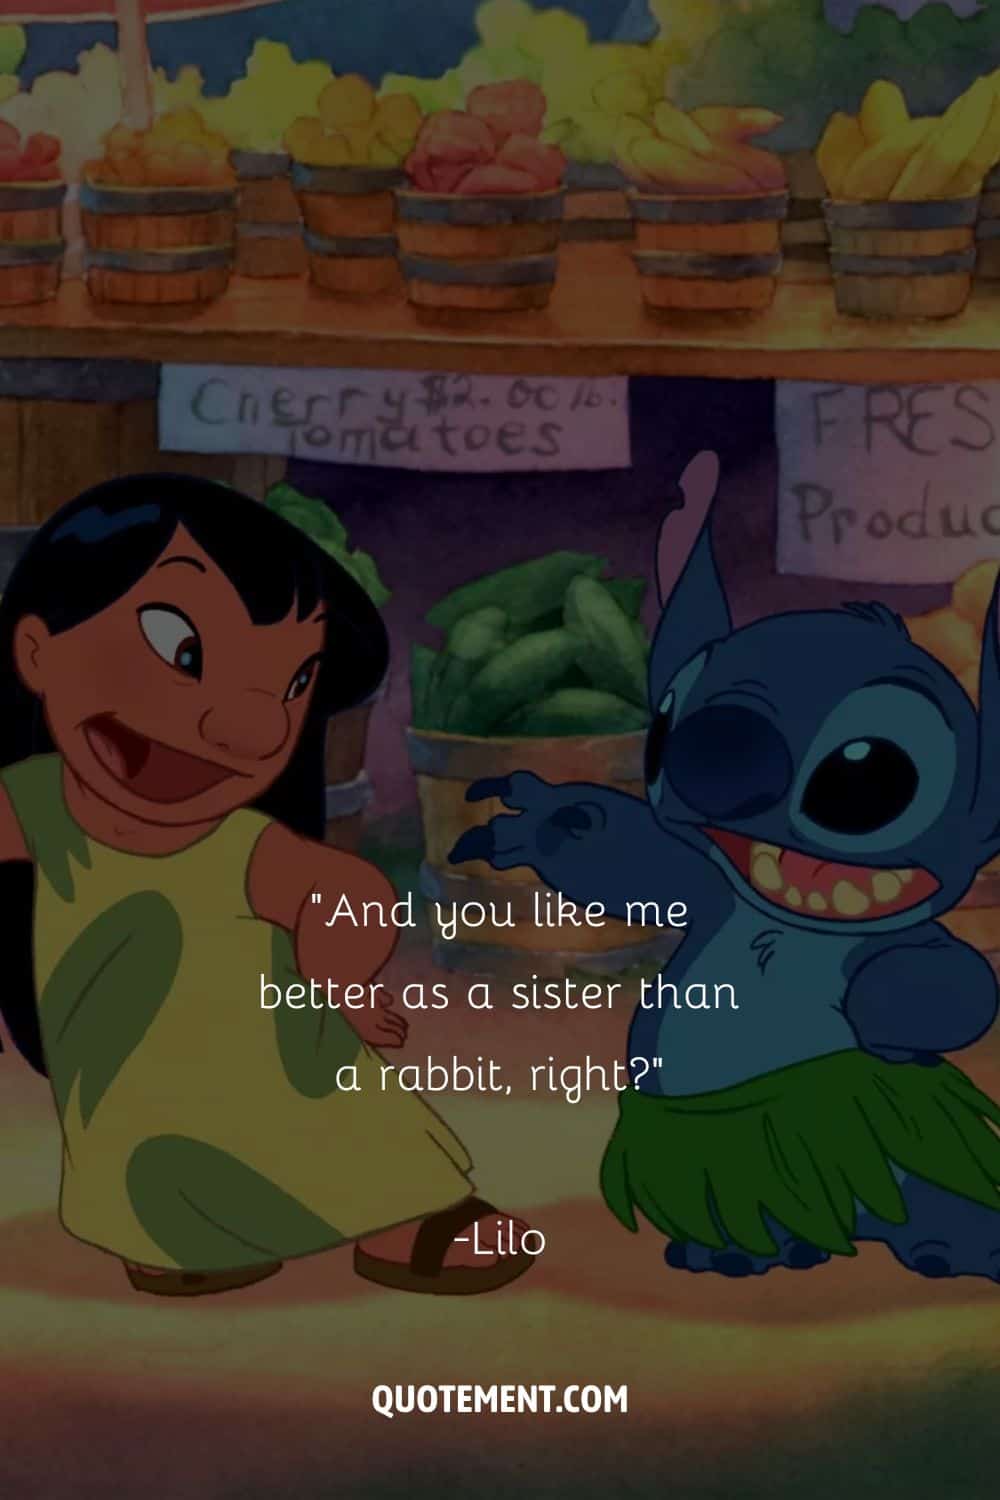 Lilo and Stitch dancing and smiling